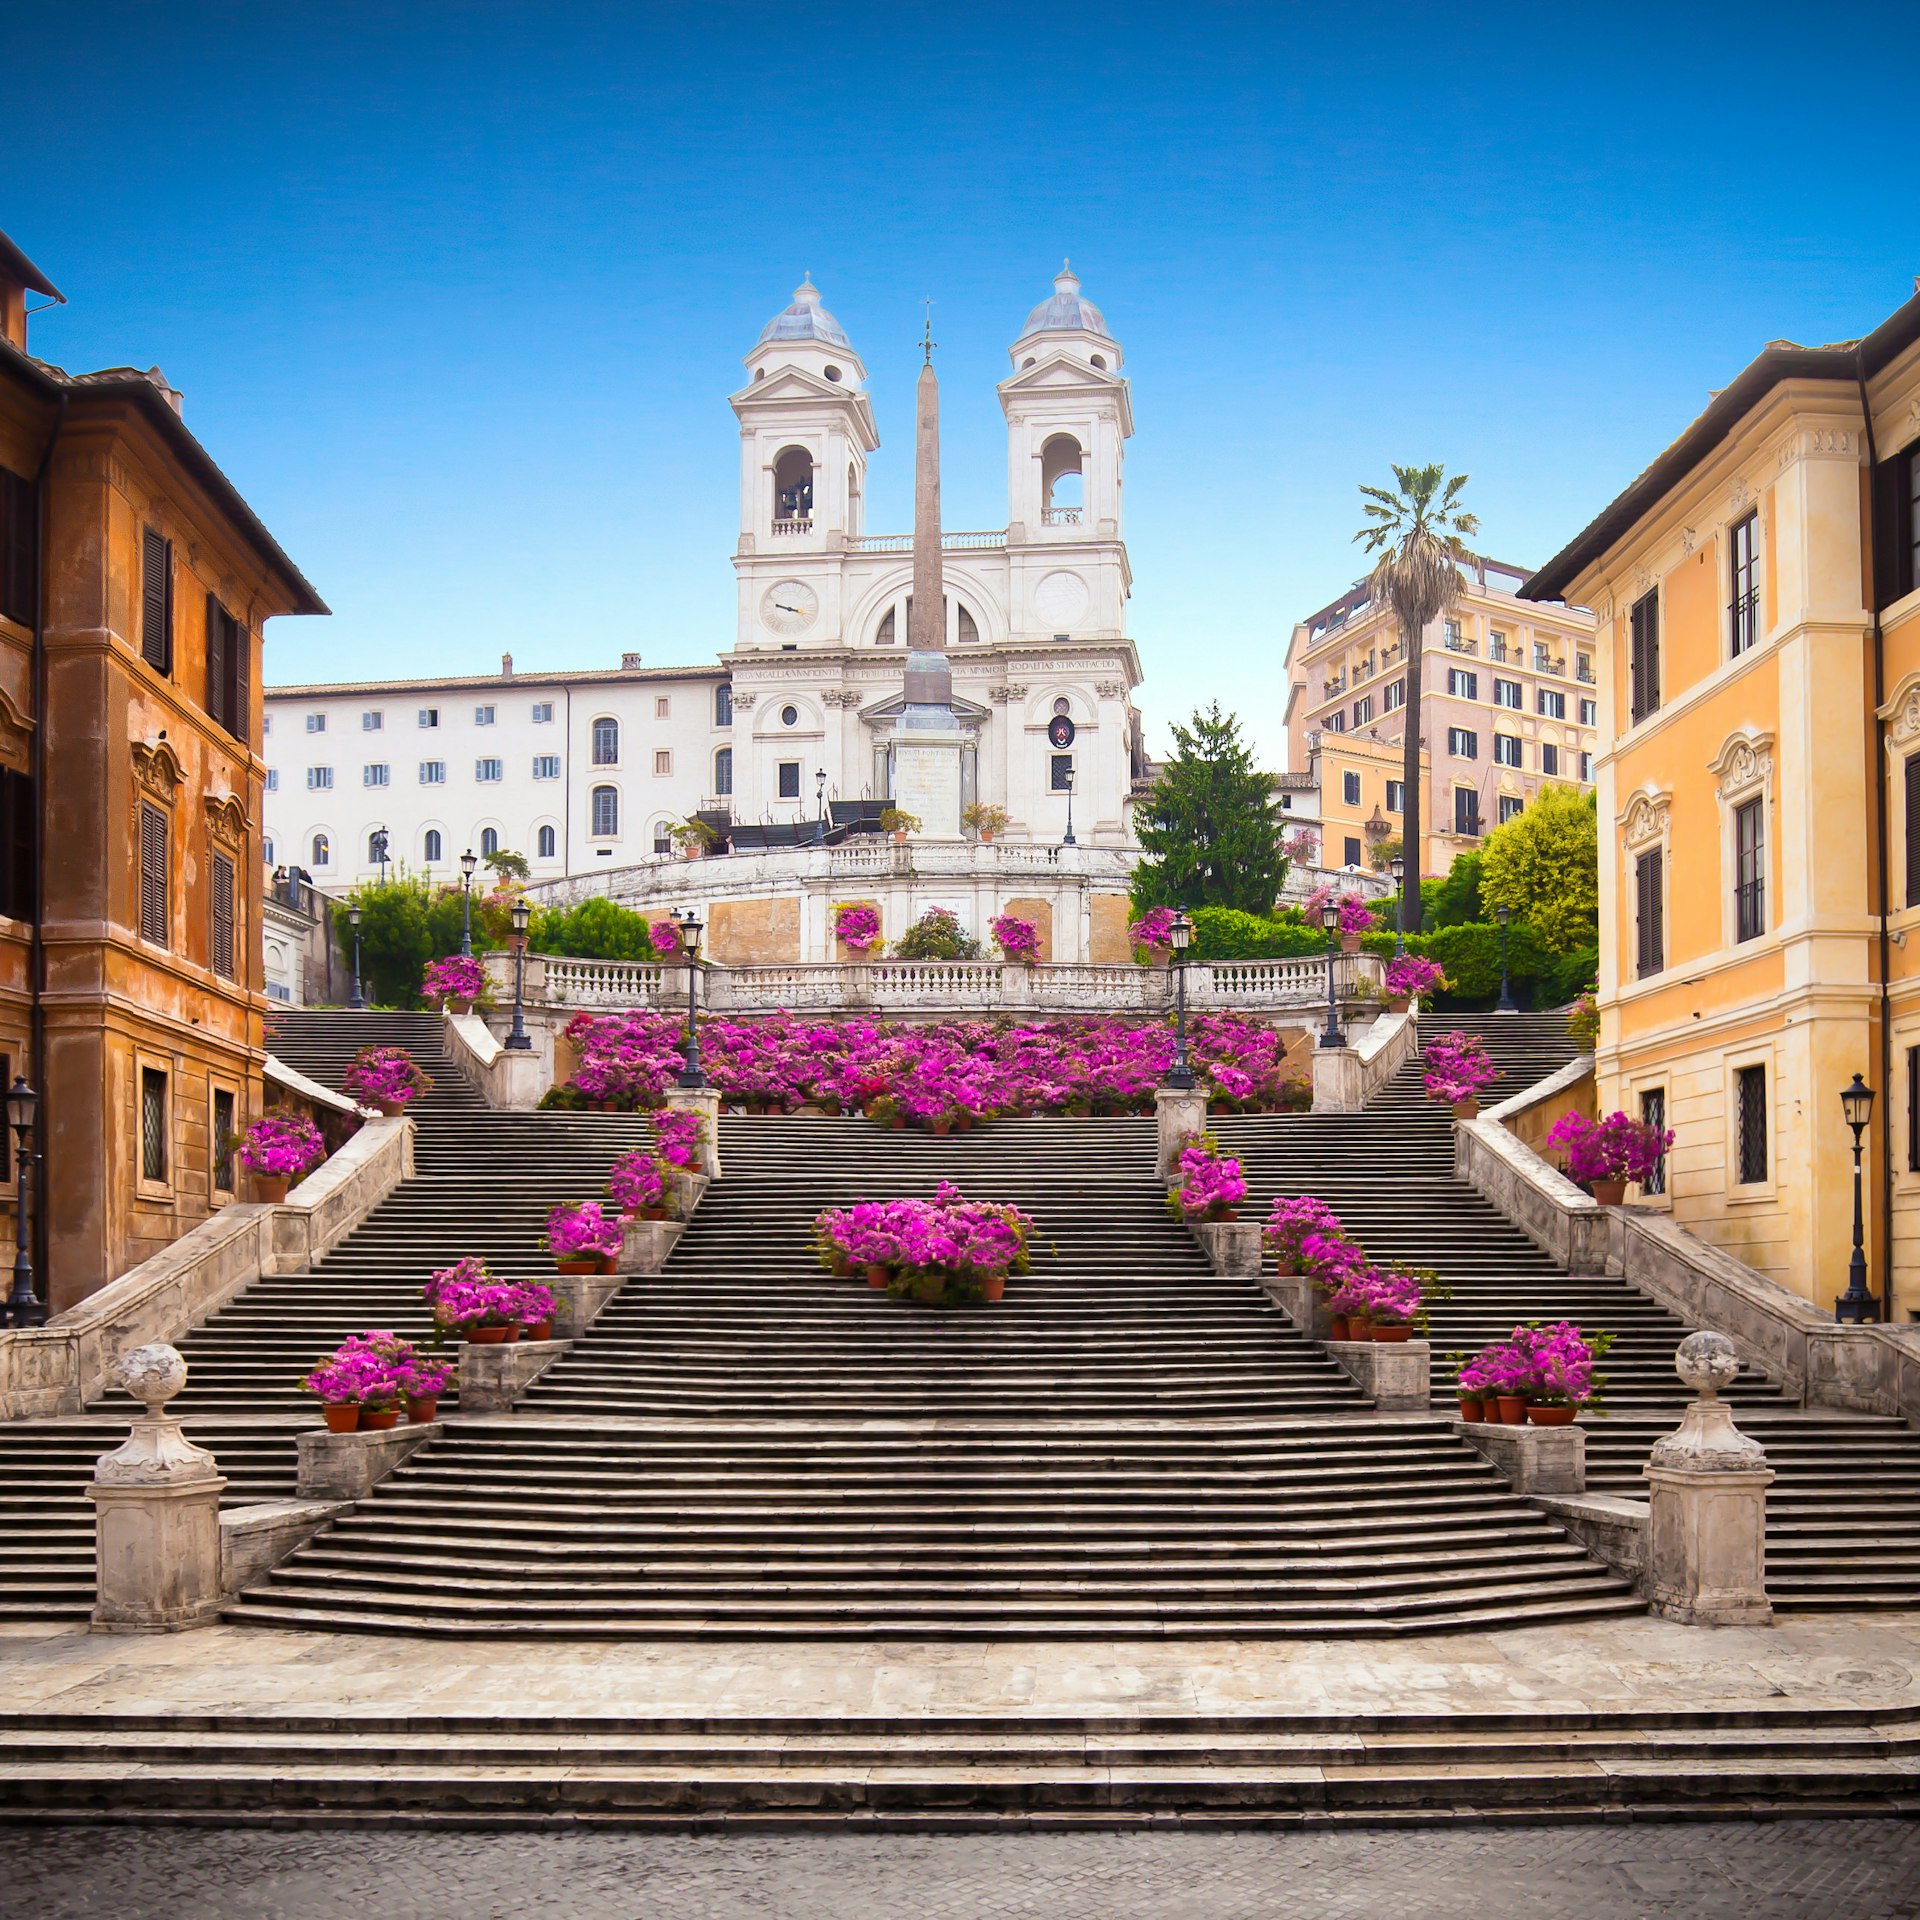 A wide staircase leads to a white church. Pink flowers line the steps